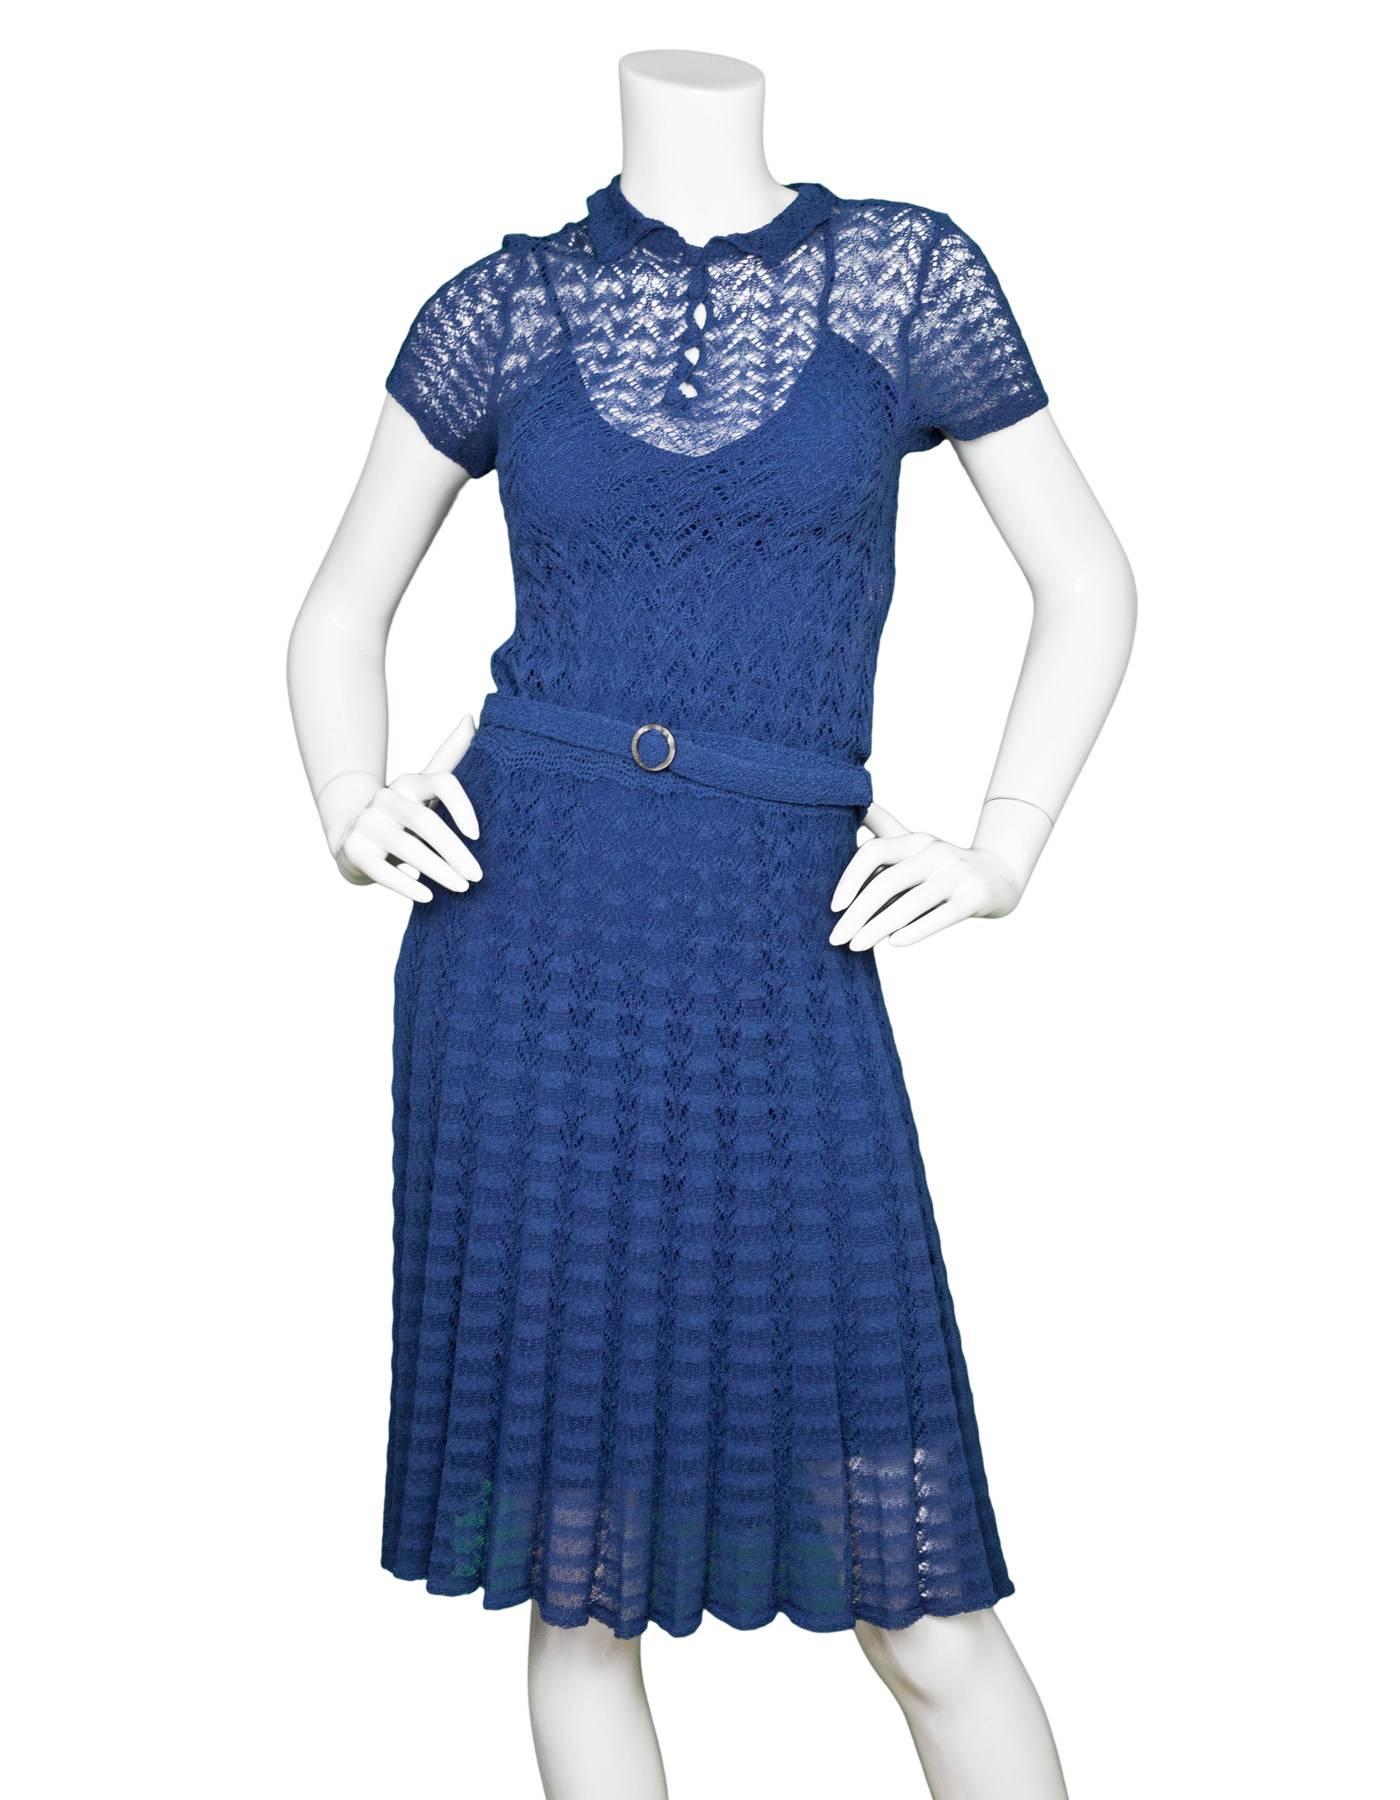 Ralph Lauren Blue Crochet Dress Sz US2

Made In: China
Color: Blue
Composition: 75% viscose, 25% nylon
Lining: 95% Silk, 5% elastane
Closure/Opening: Pull over
Exterior Pockets: None
Interior Pockets: None
Overall Condition: Very good pre-owned